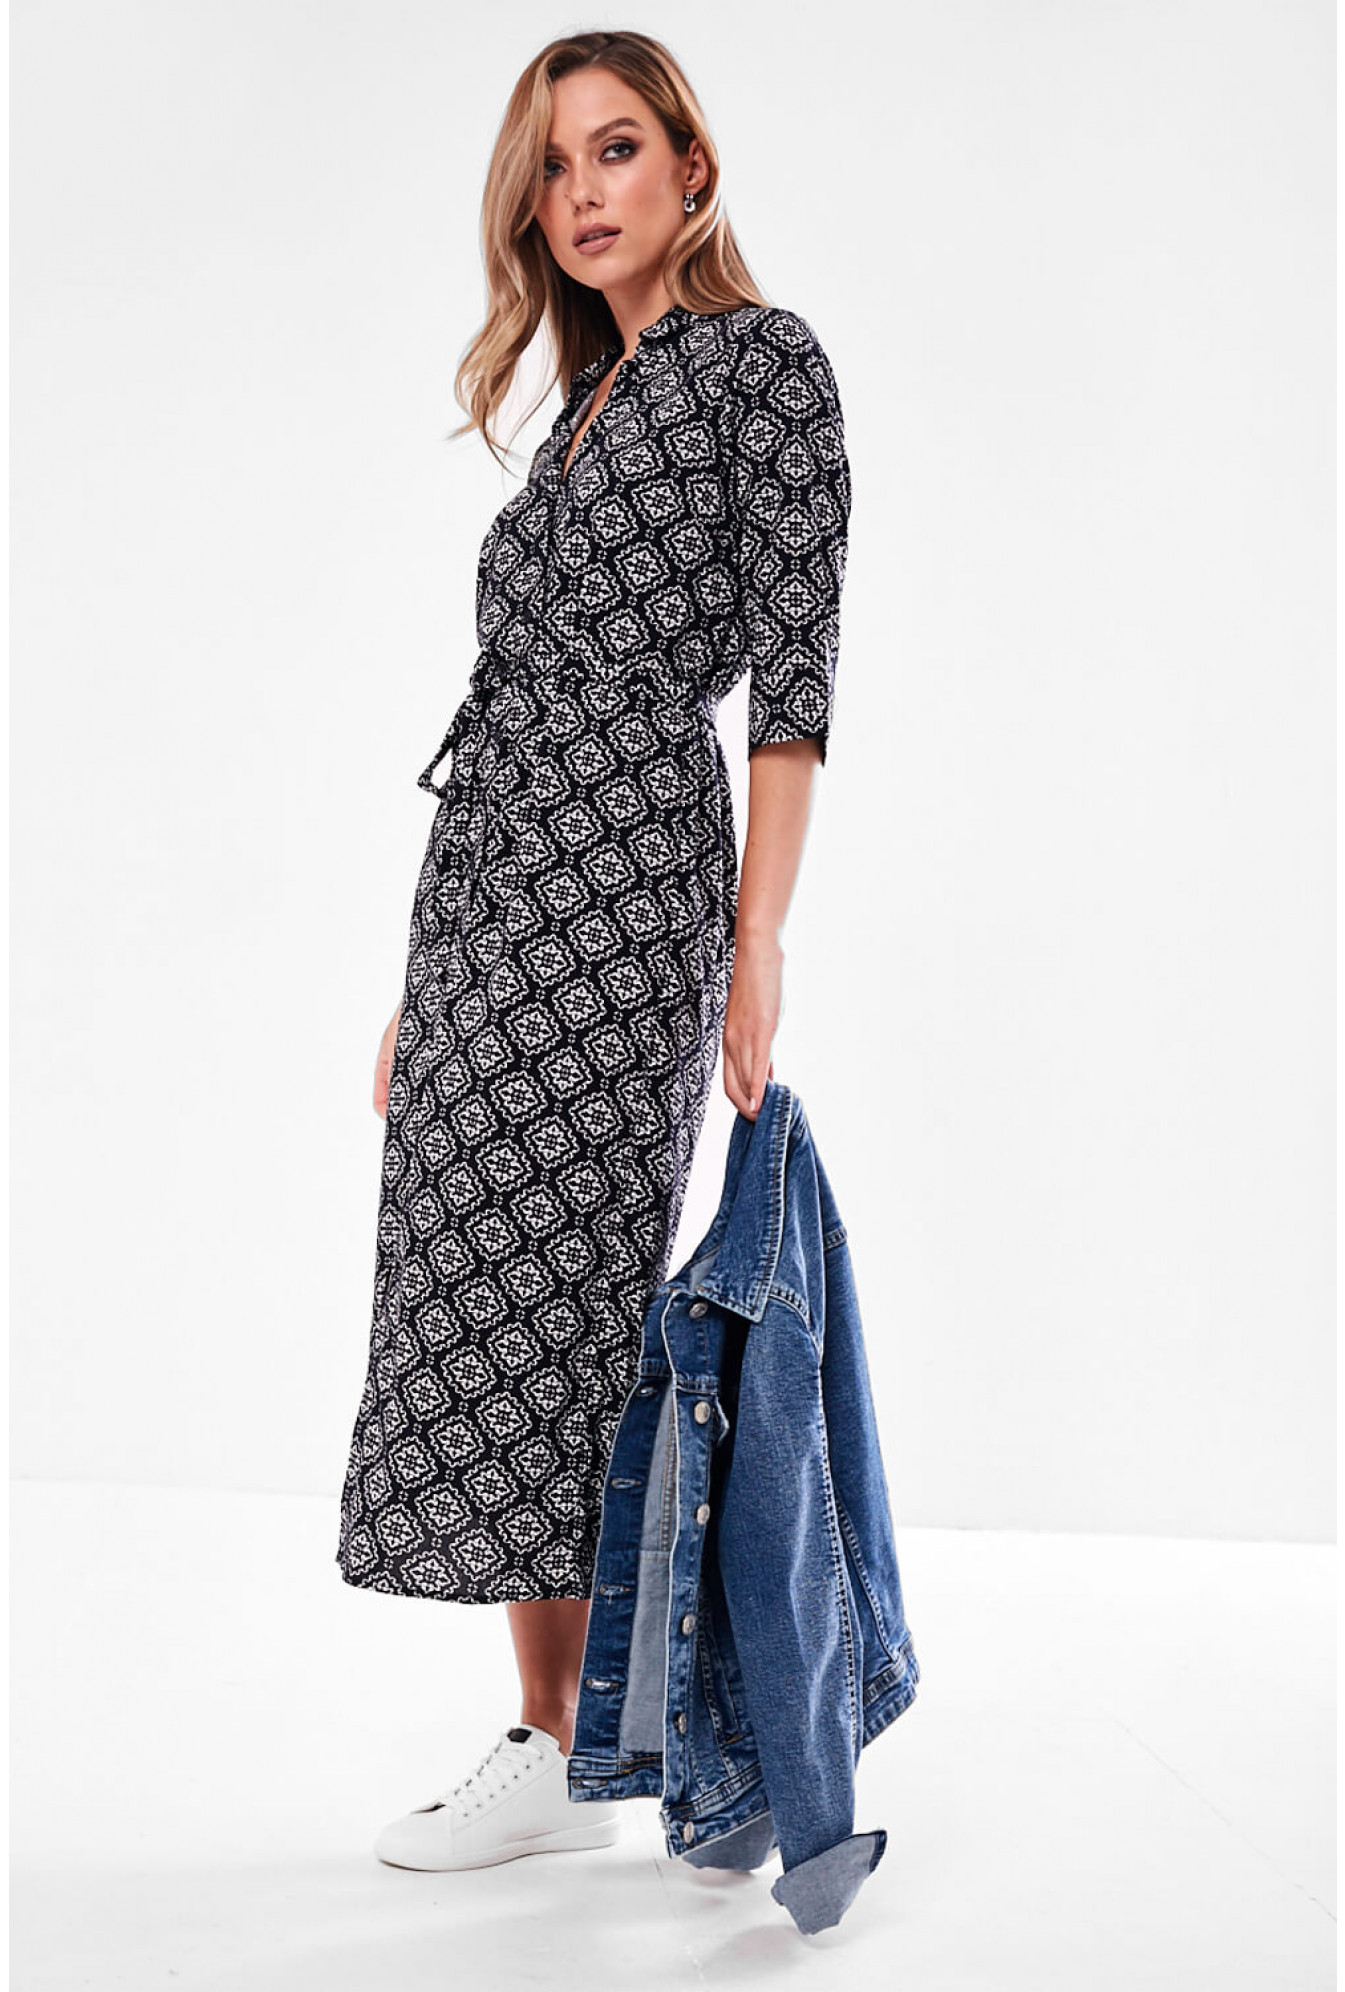 shirt dress with trainers